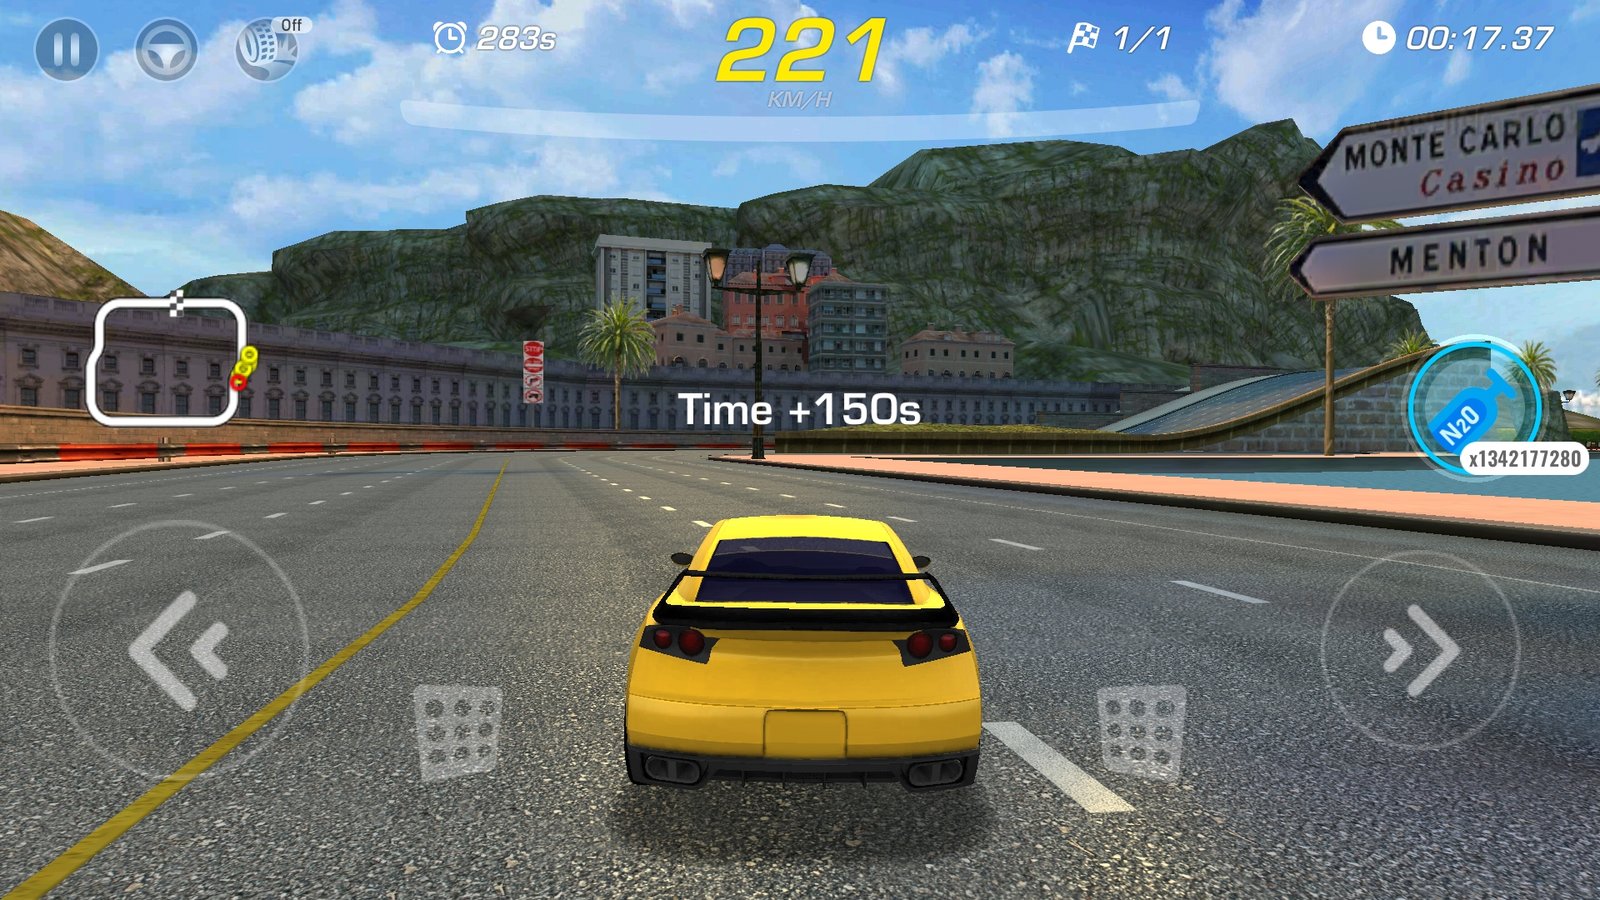 Speed Car Racing- 3D Car Games v1.0.19 MOD APK -  - Android &  iOS MODs, Mobile Games & Apps